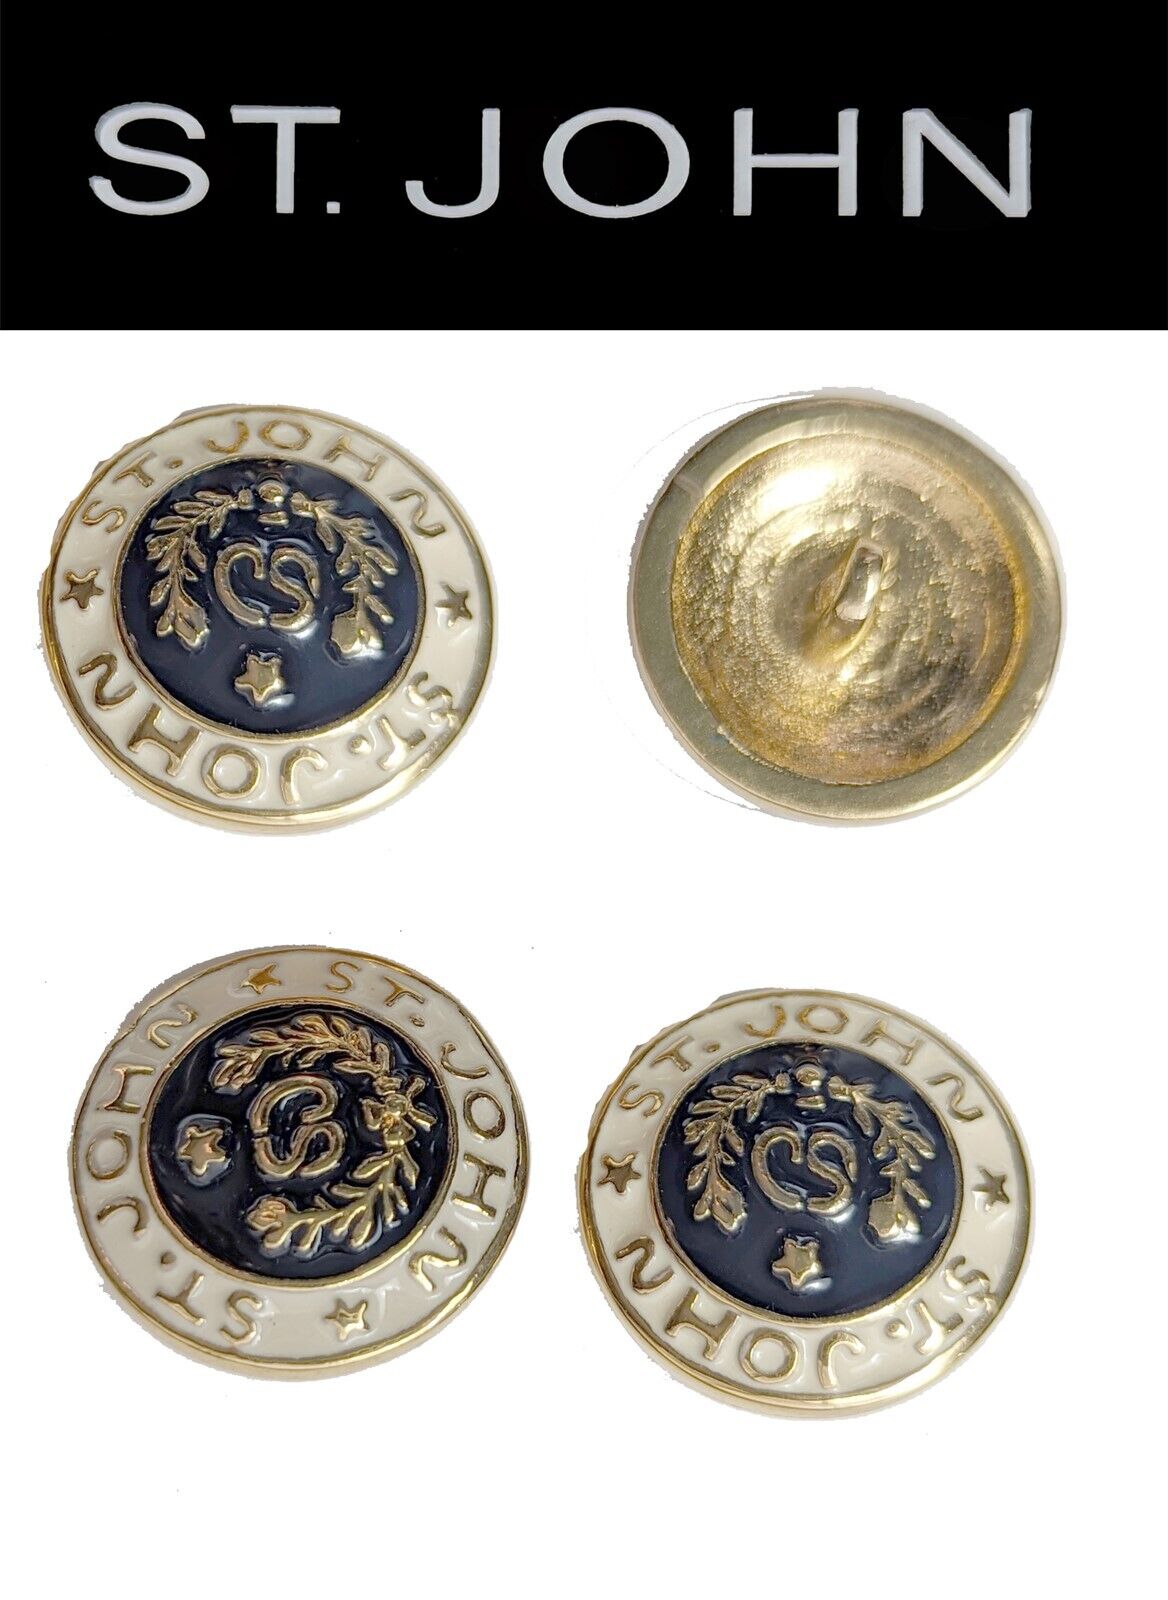 St John Knits (0.7 In) Gold/ White/Black Victory Wreath Logo Replacement Buttons